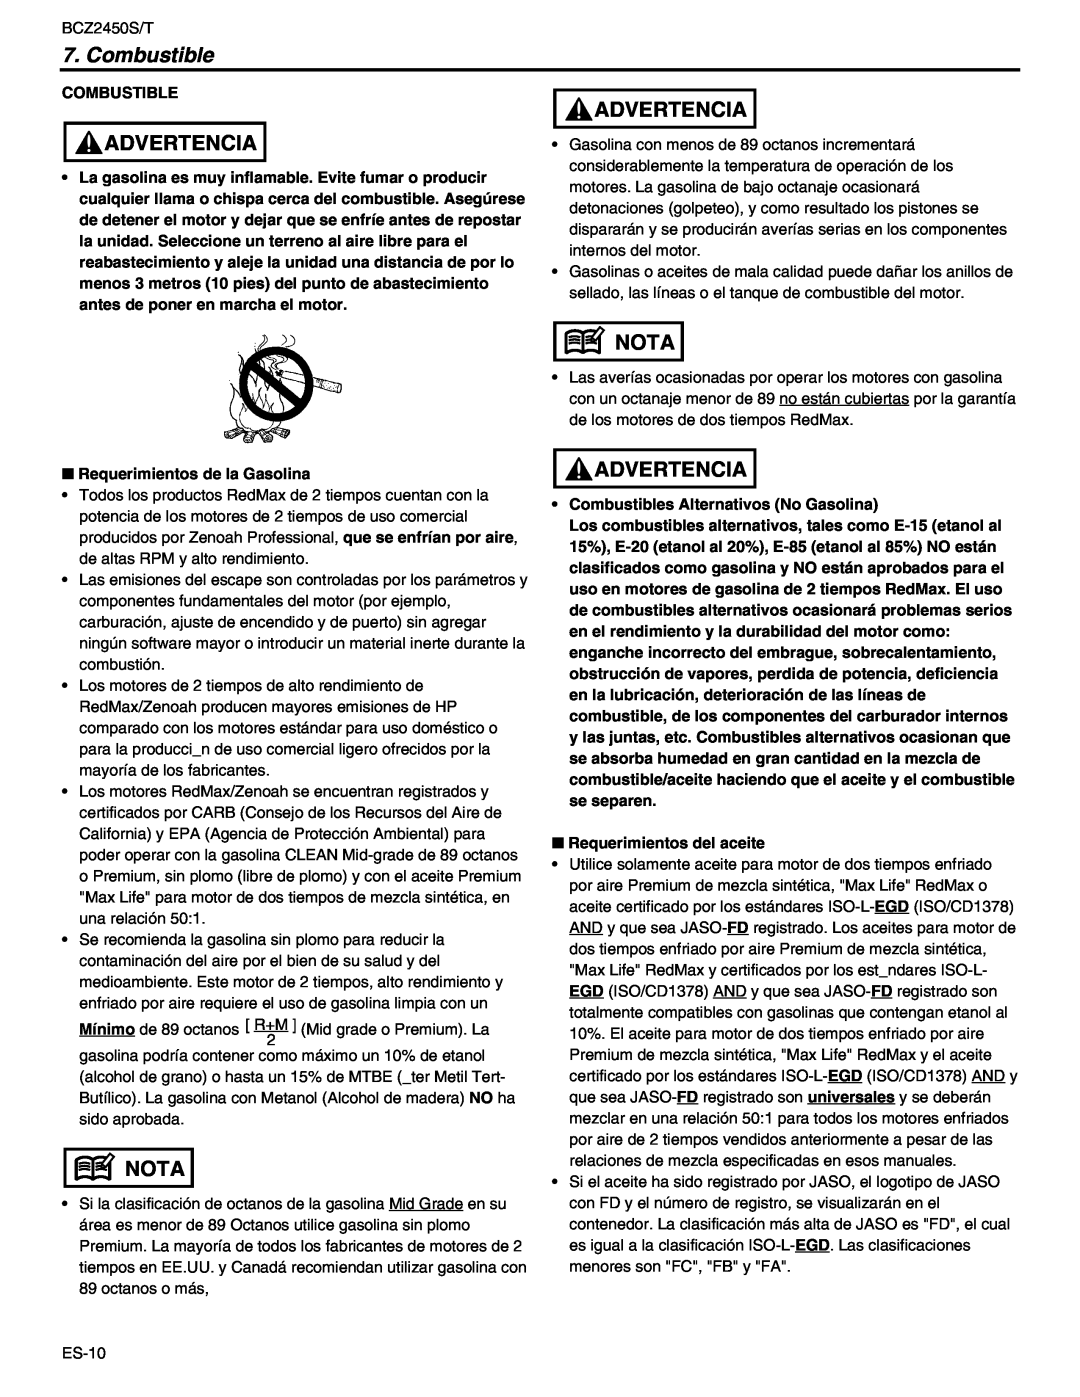 RedMax BCZ2450T, BCZ2450S manual Combustible, Advertencia, Nota 